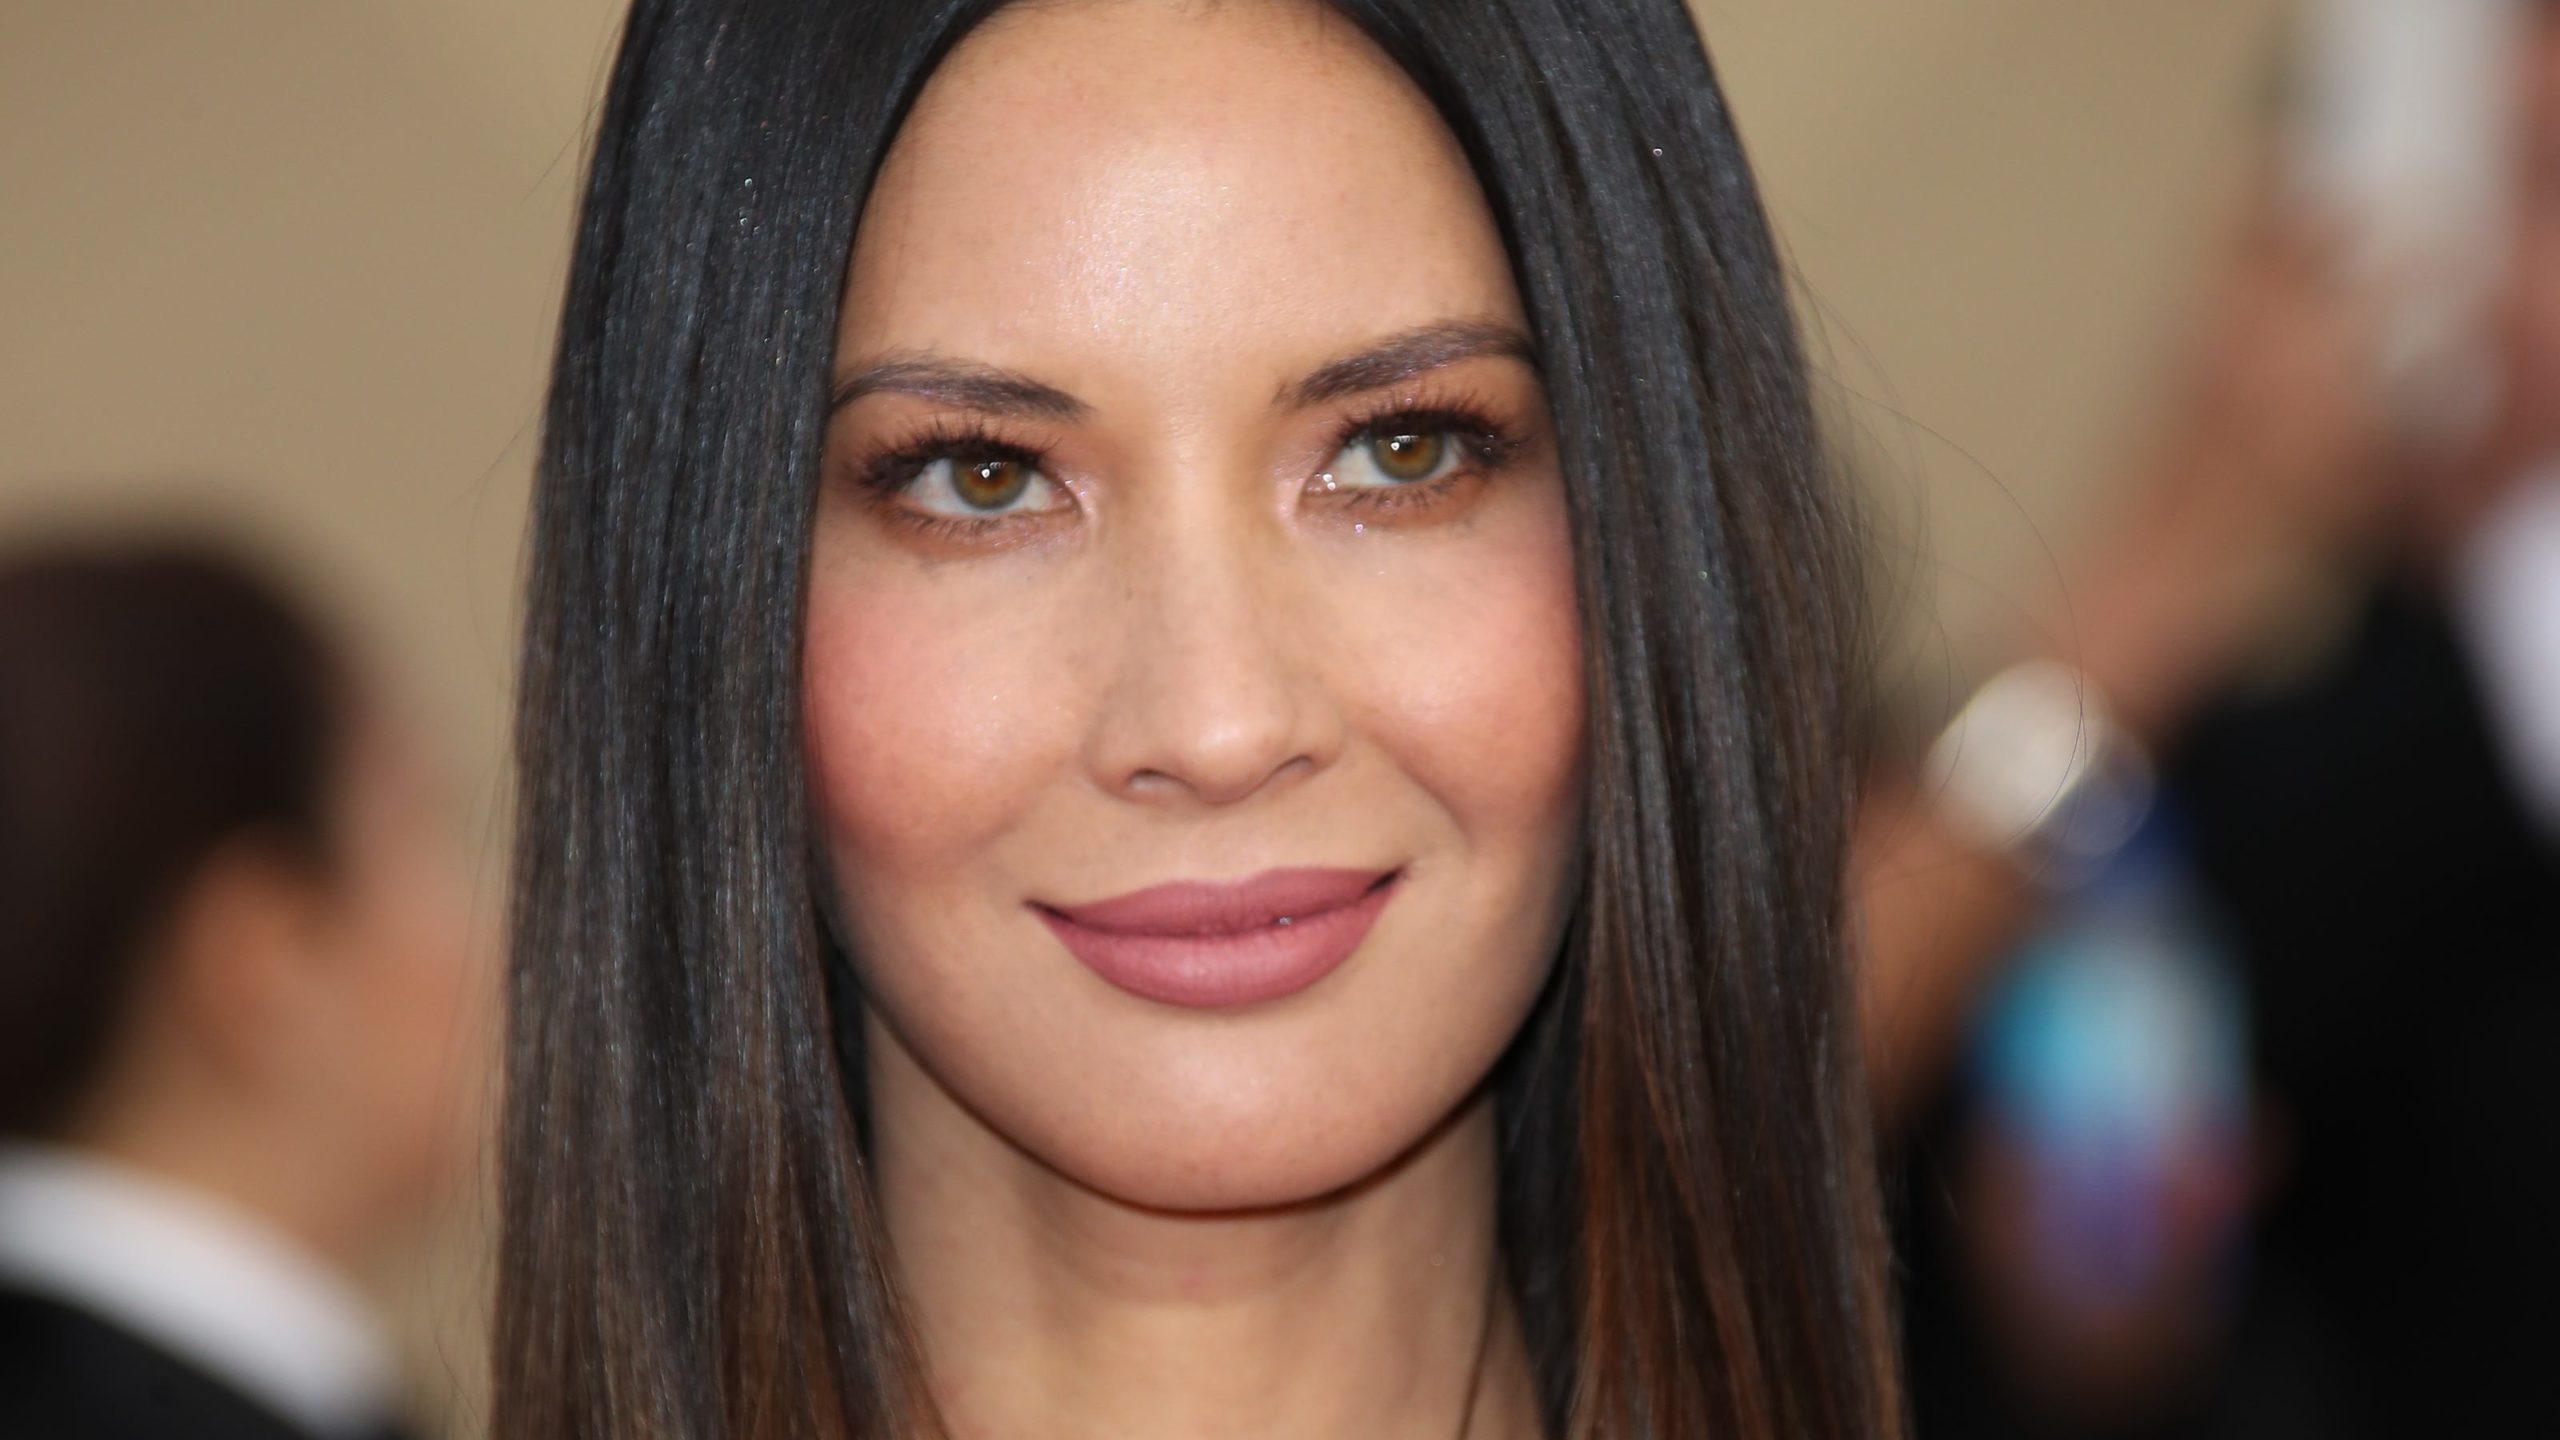 ‘No one comes to our aid’: Olivia Munn speaks out about challenges Asian women face in special